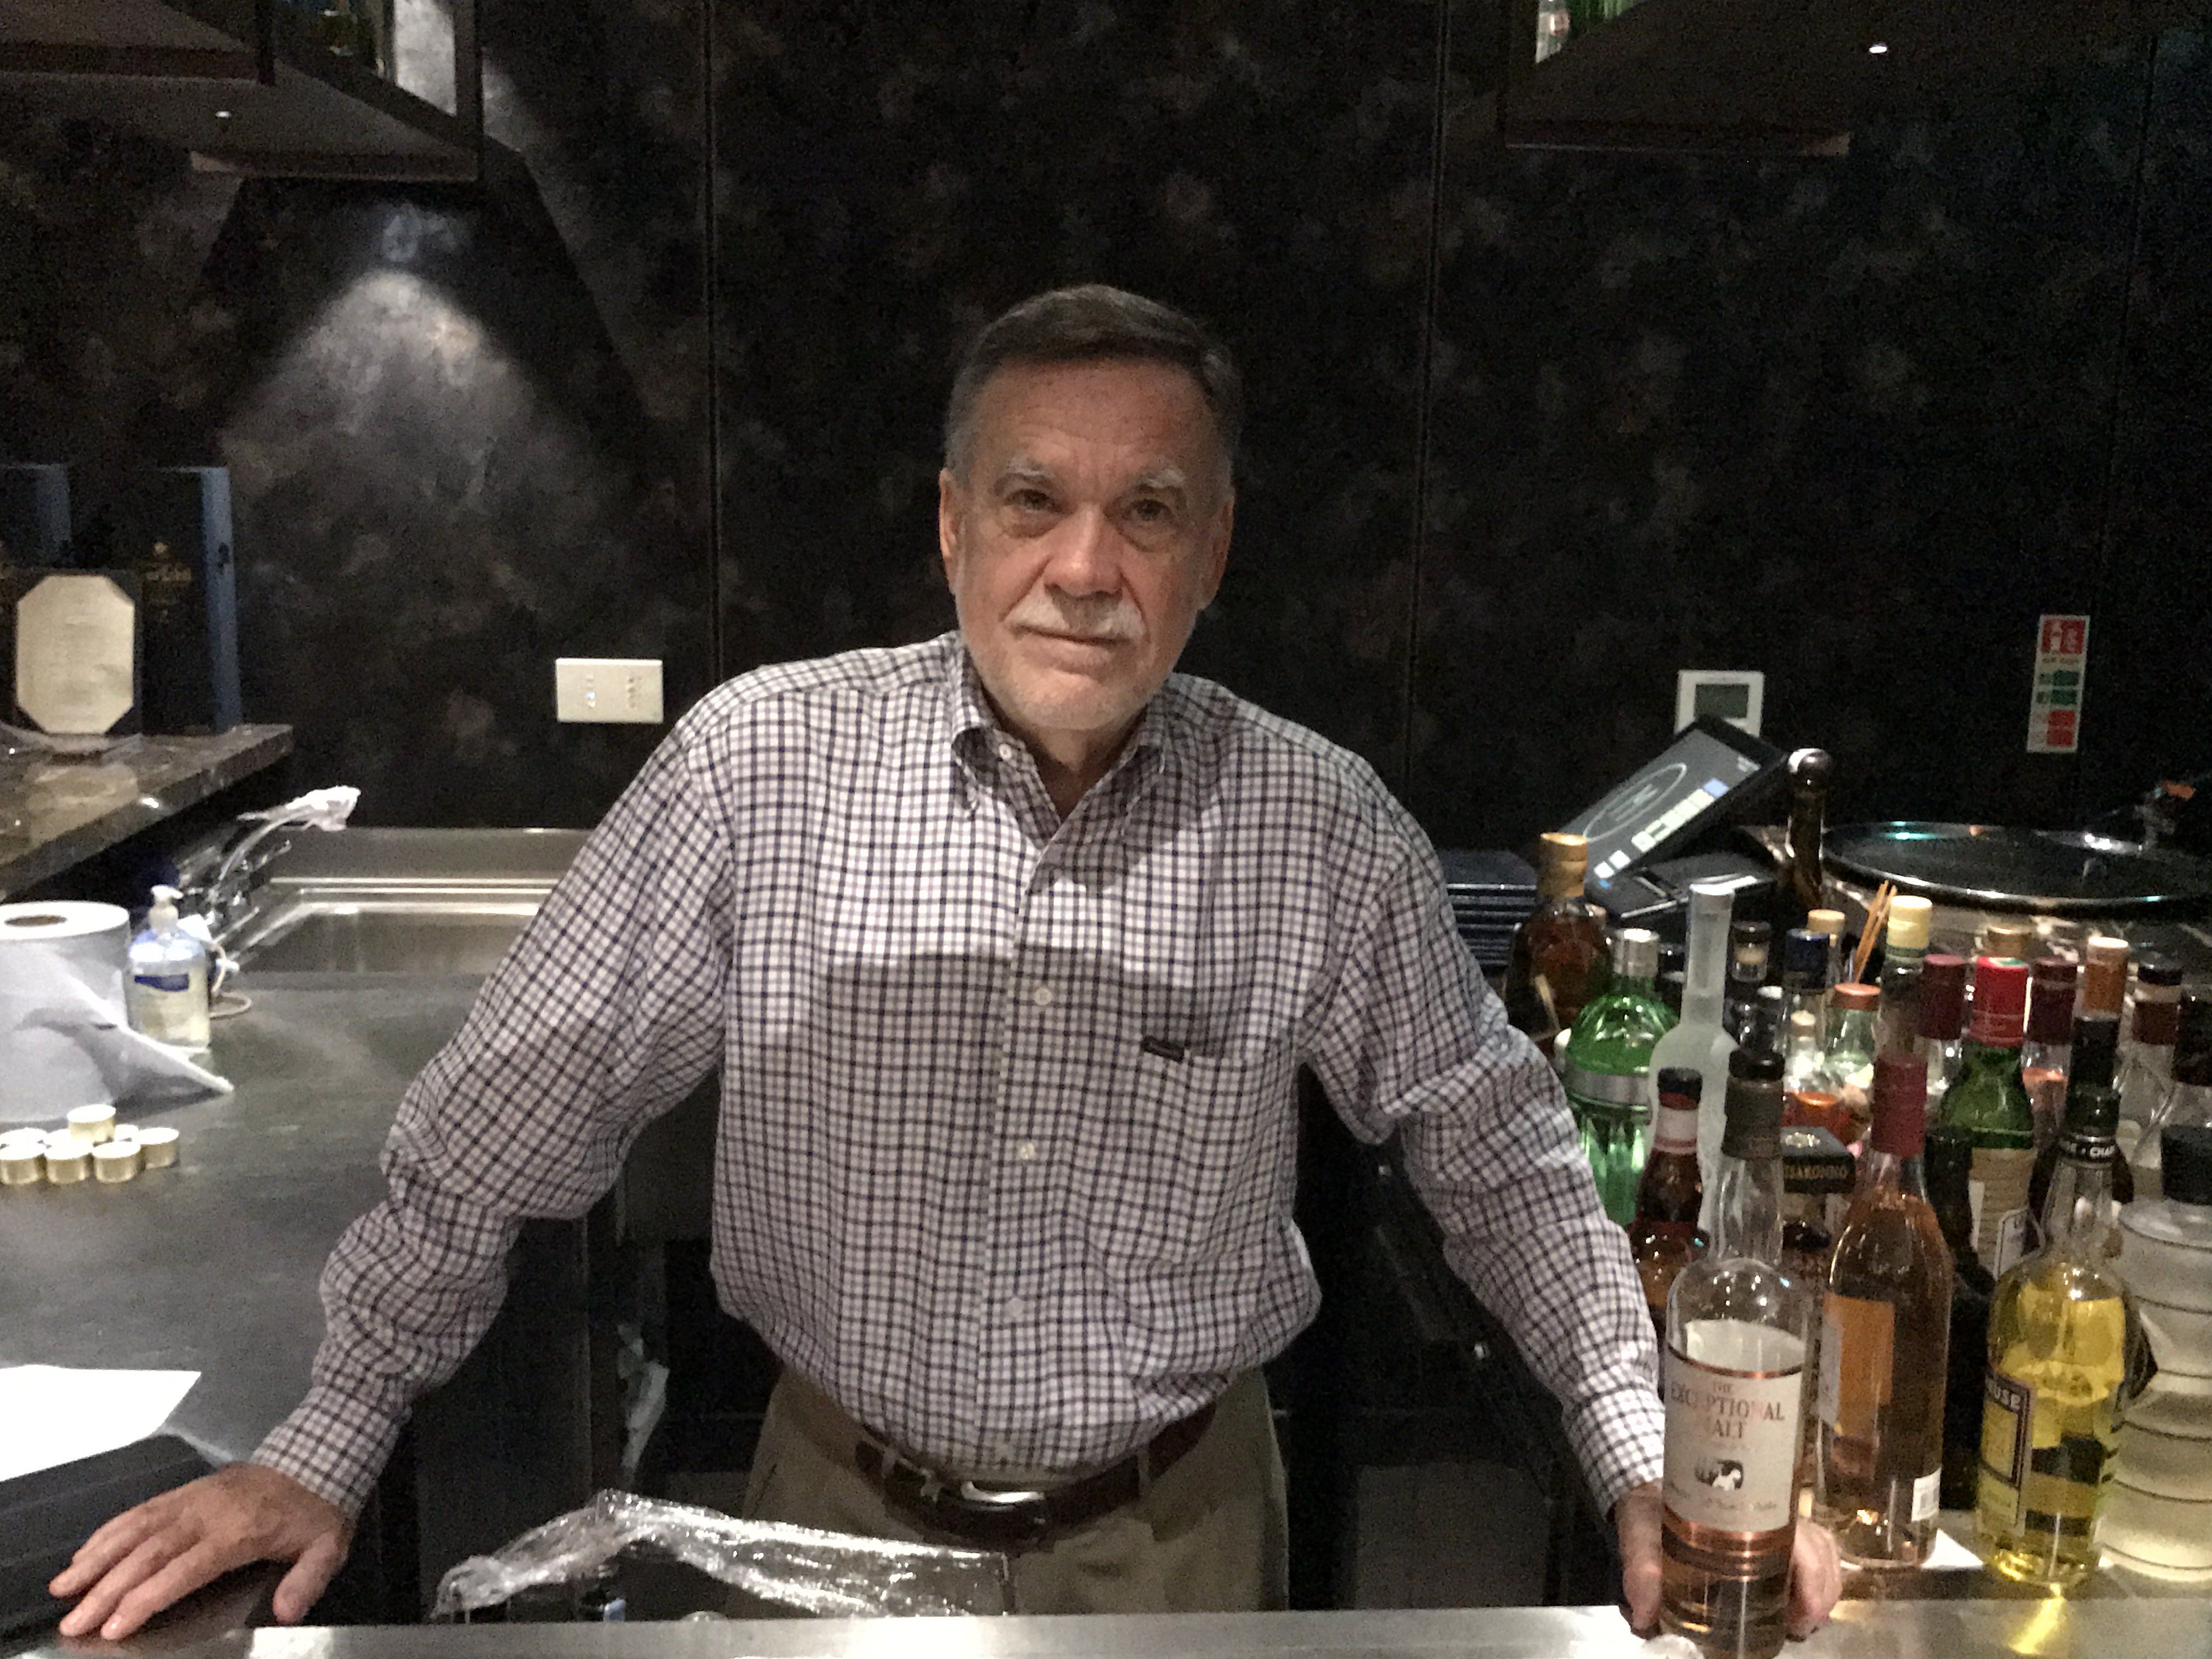 Don Sutcliffe’s lifetime dream to create Exceptional whiskies